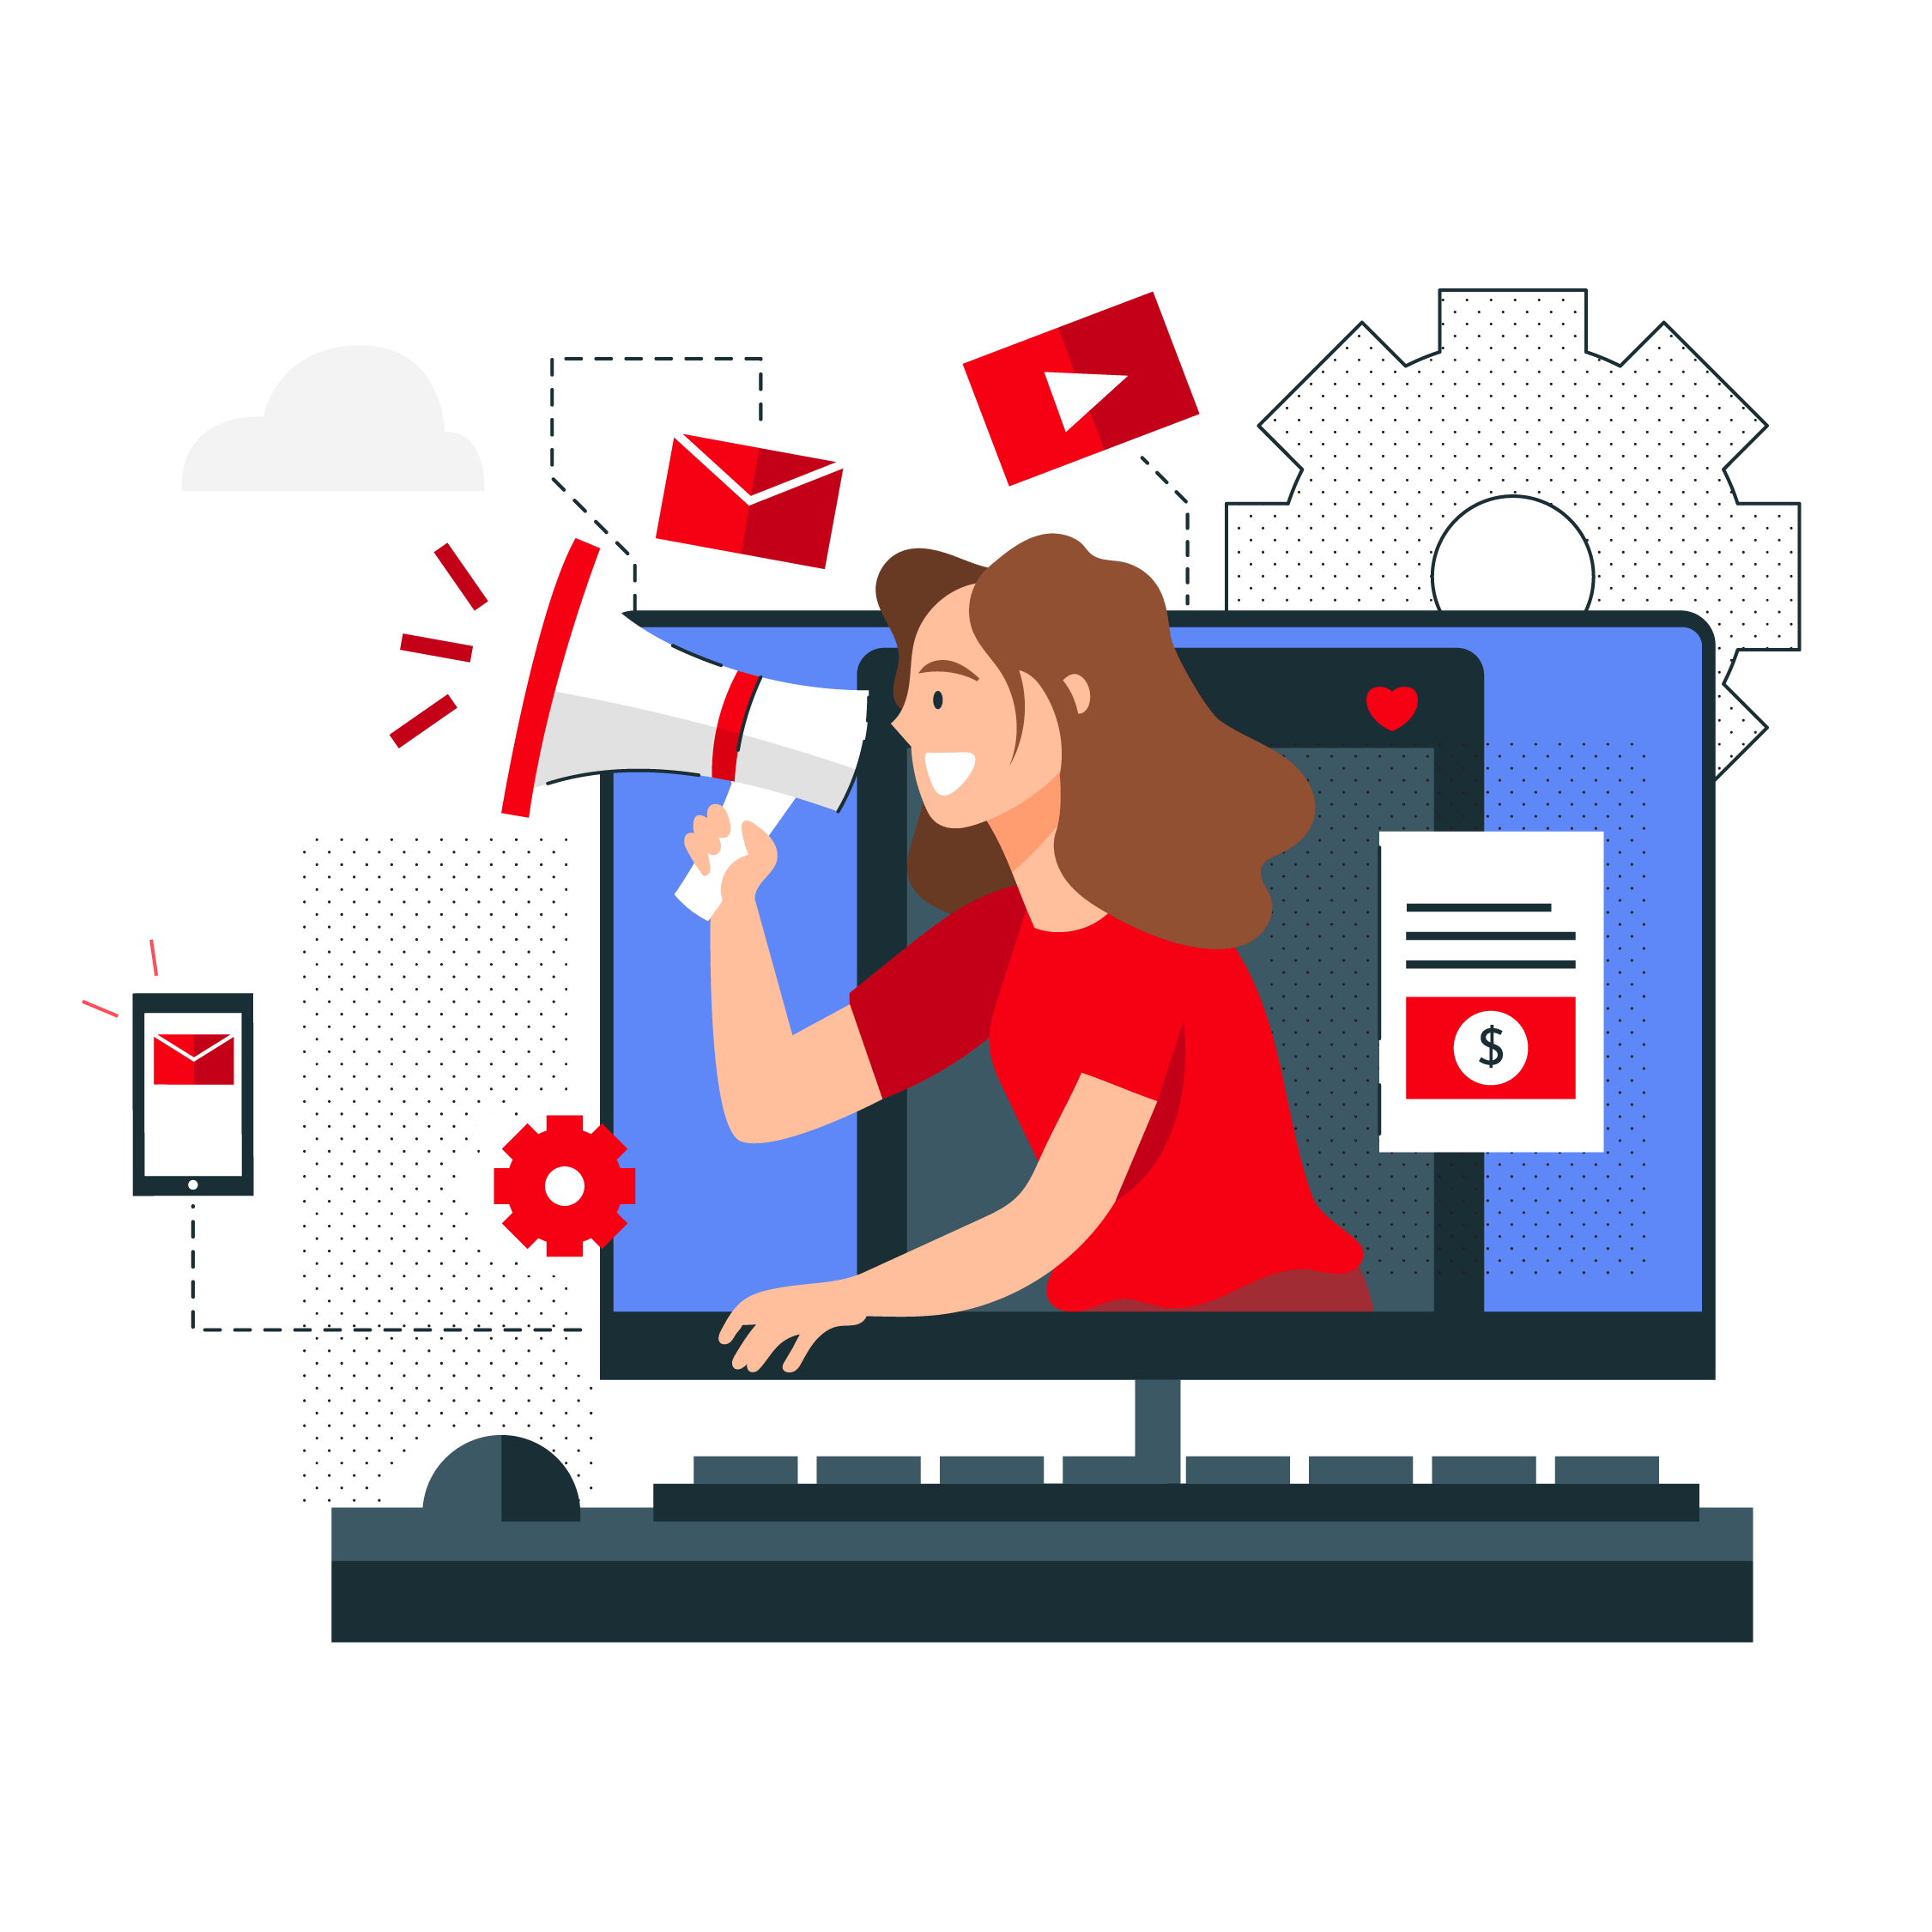 Illustration of girl holding megaphone surrounded by icons of phones, mail, and computers.